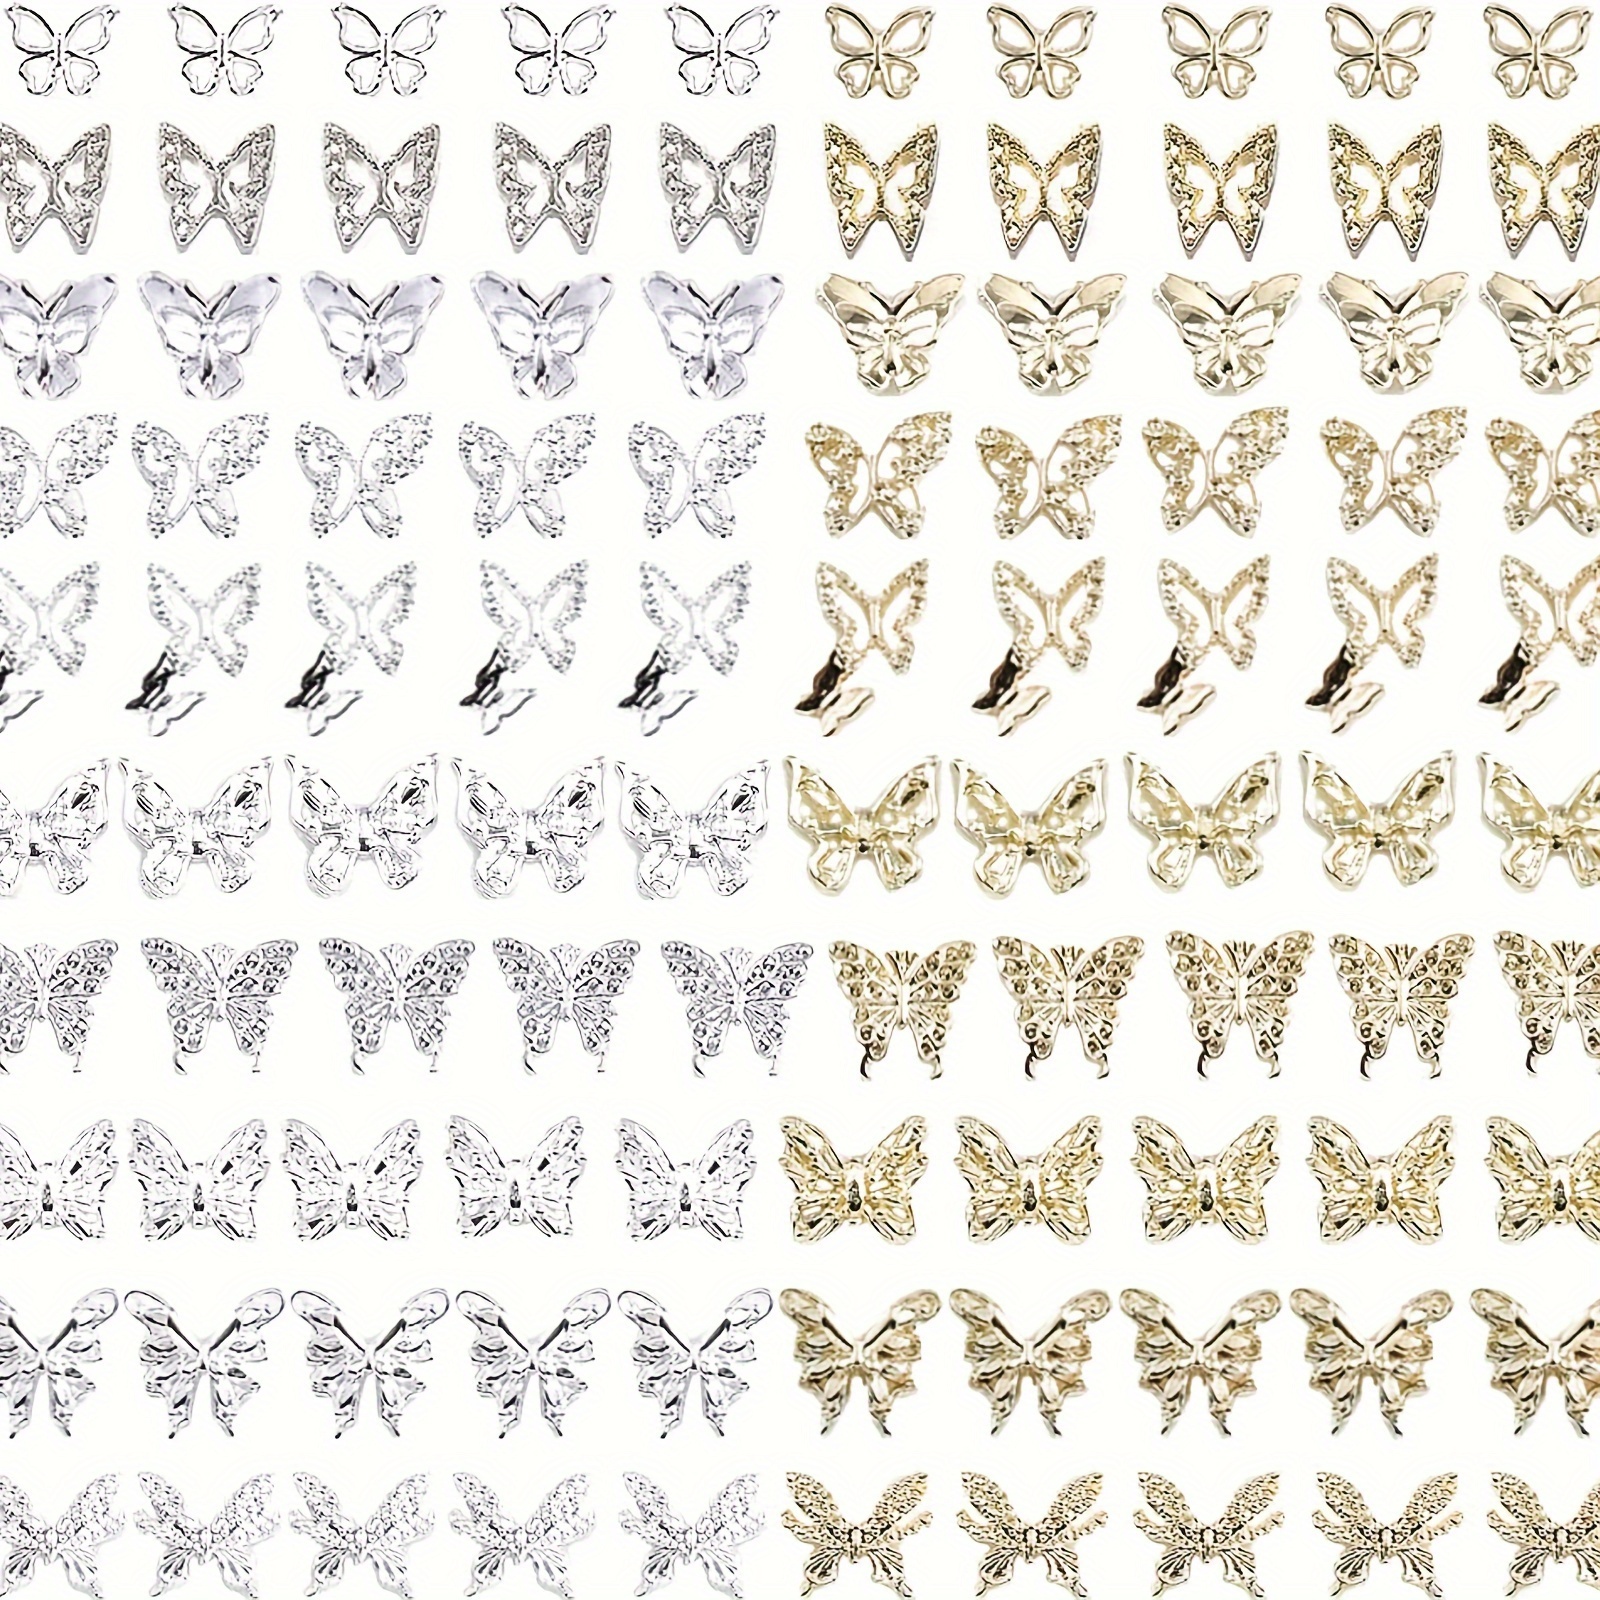 

50/100 Pcs Silvery & Golden Butterfly Nail Charms - 3d Metal Alloy Charms For Acrylic Nails, Perfect For Diy Nail Art & Salon Supplies